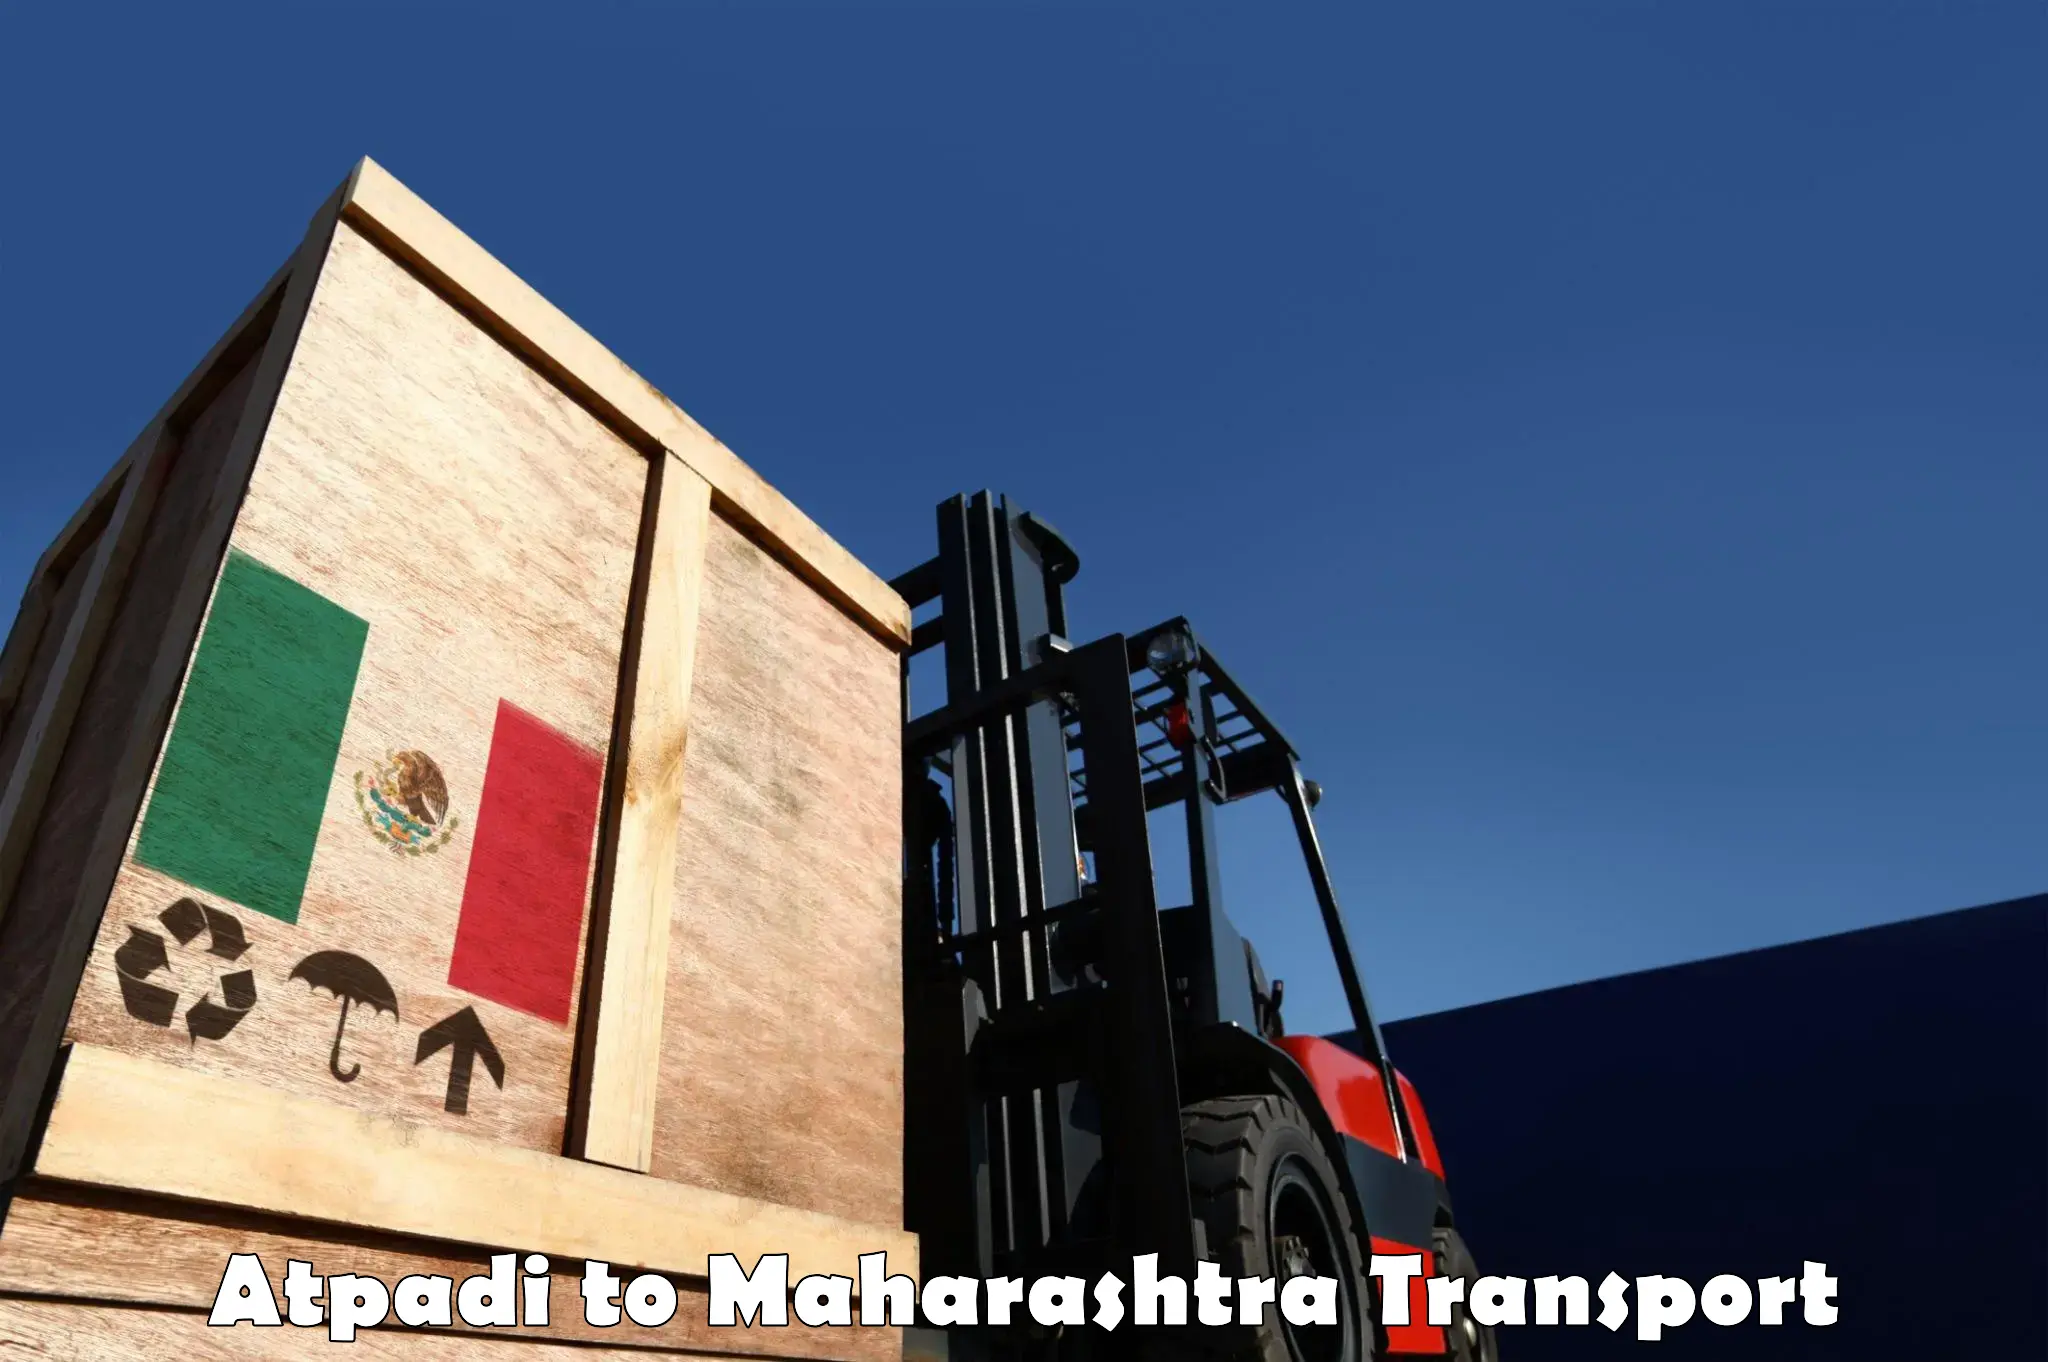 Part load transport service in India Atpadi to Dharmabad